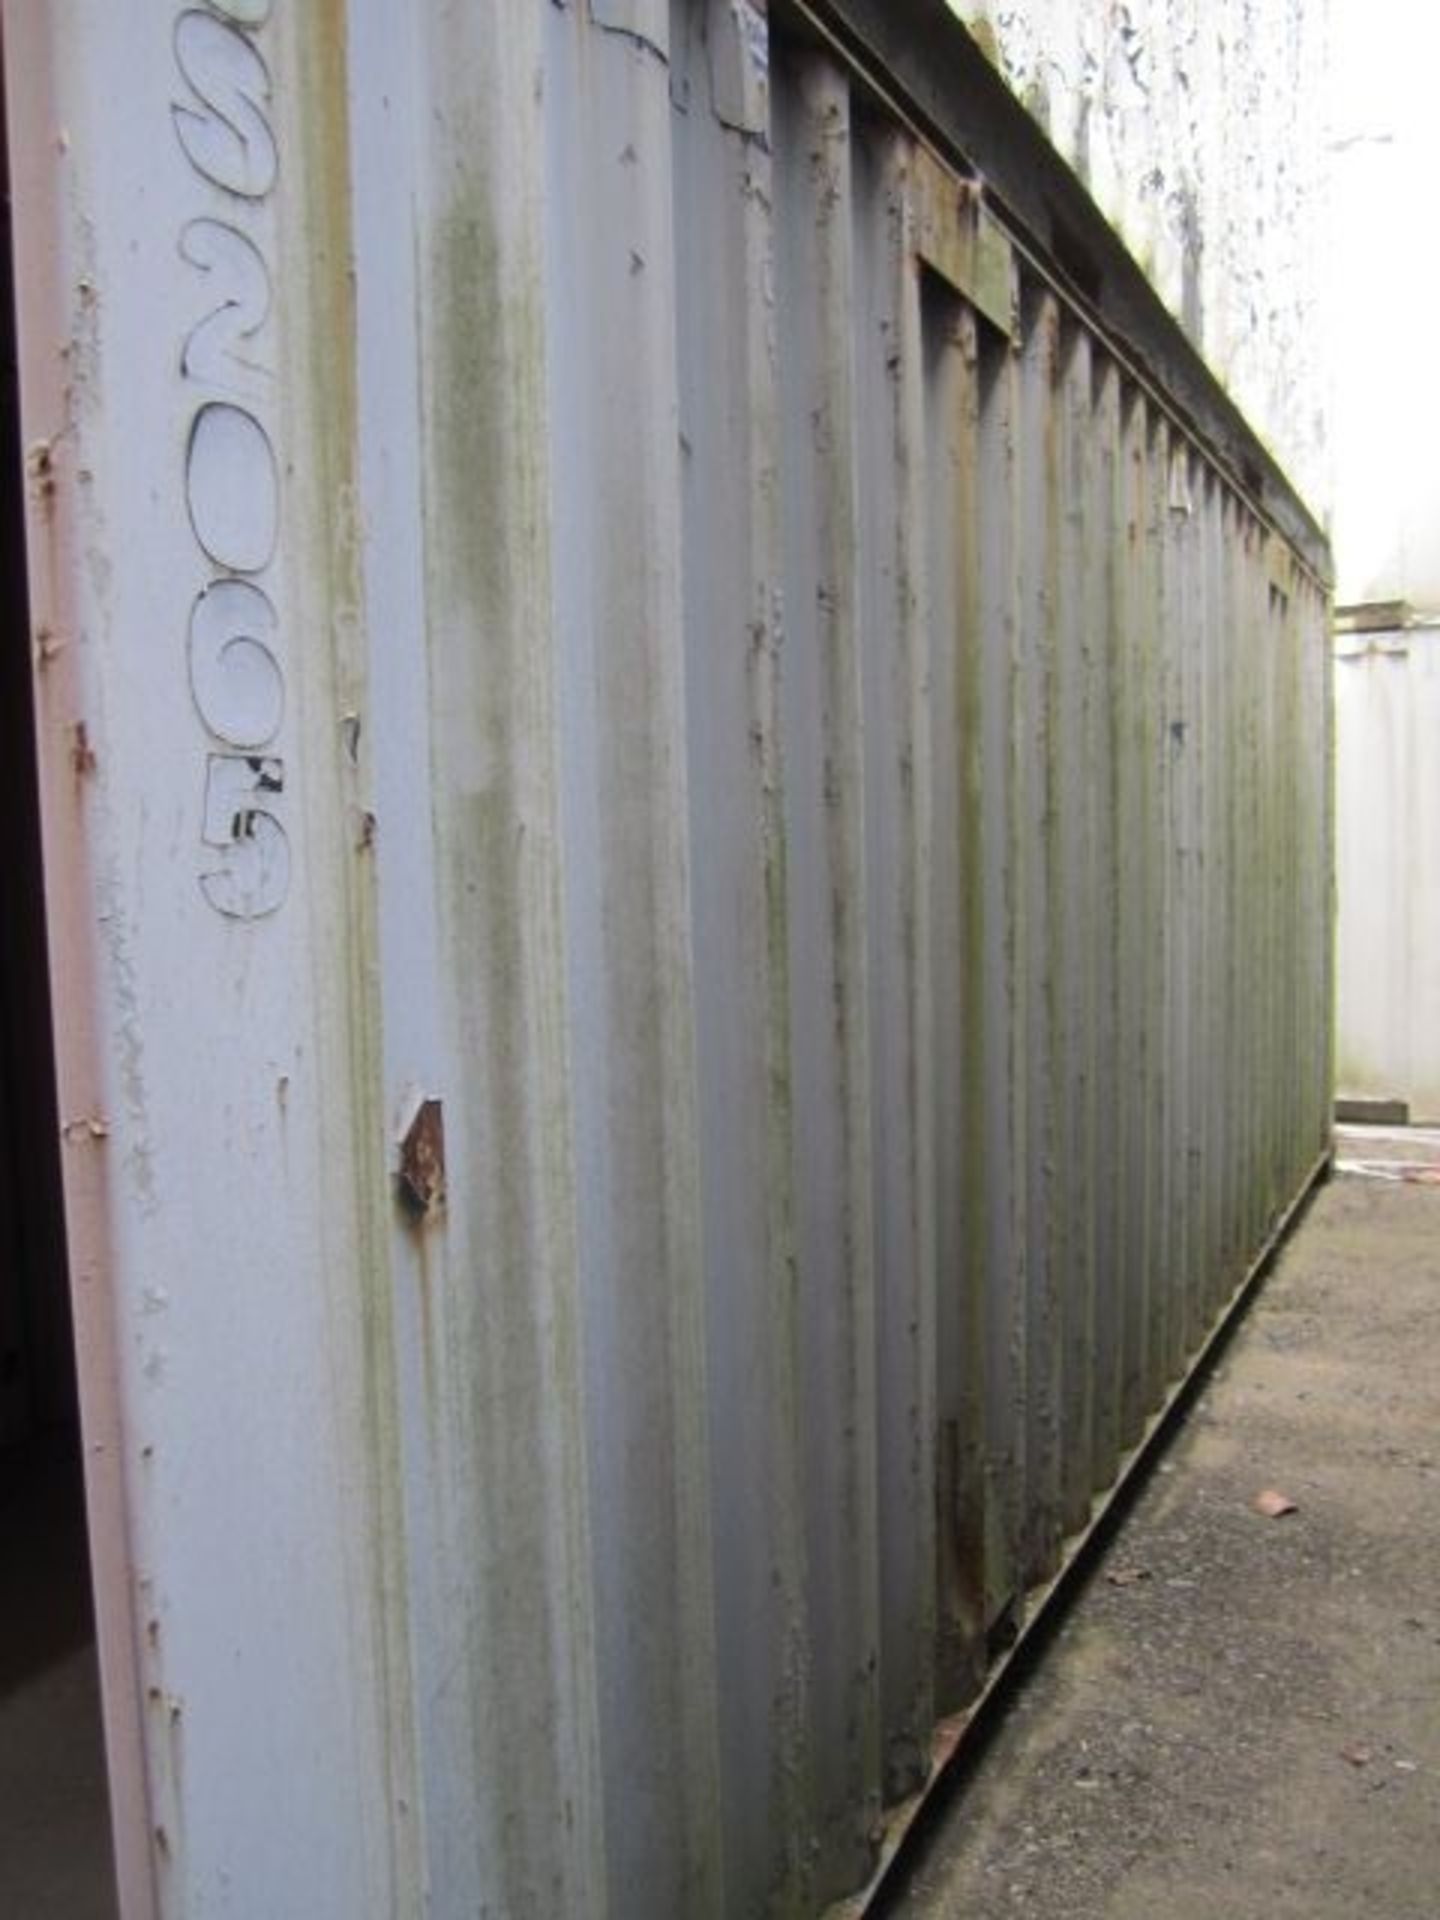 wss2065 21ft x 8ft Secure Container - Image 3 of 6